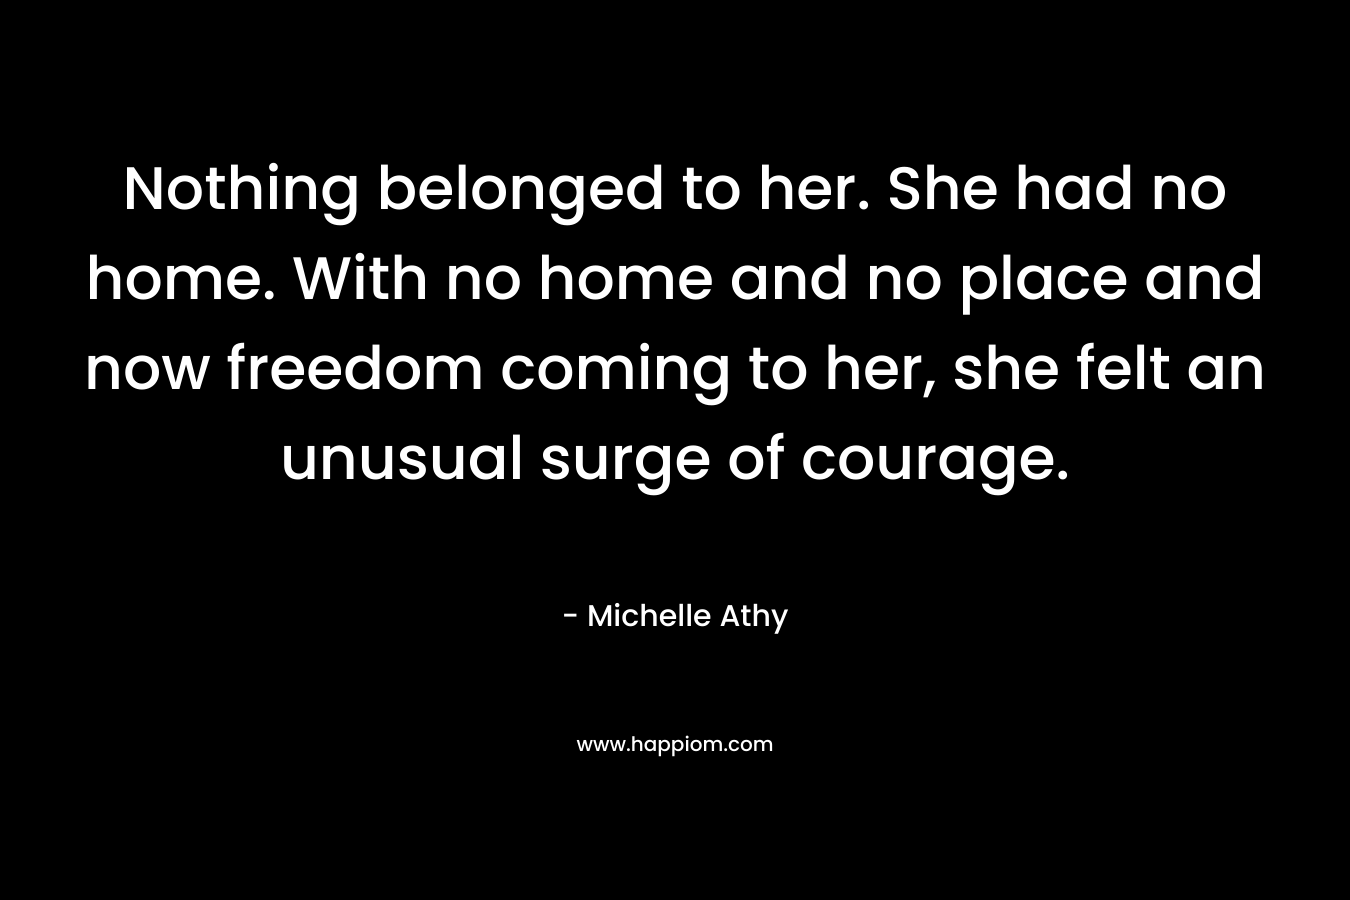 Nothing belonged to her. She had no home. With no home and no place and now freedom coming to her, she felt an unusual surge of courage. – Michelle Athy